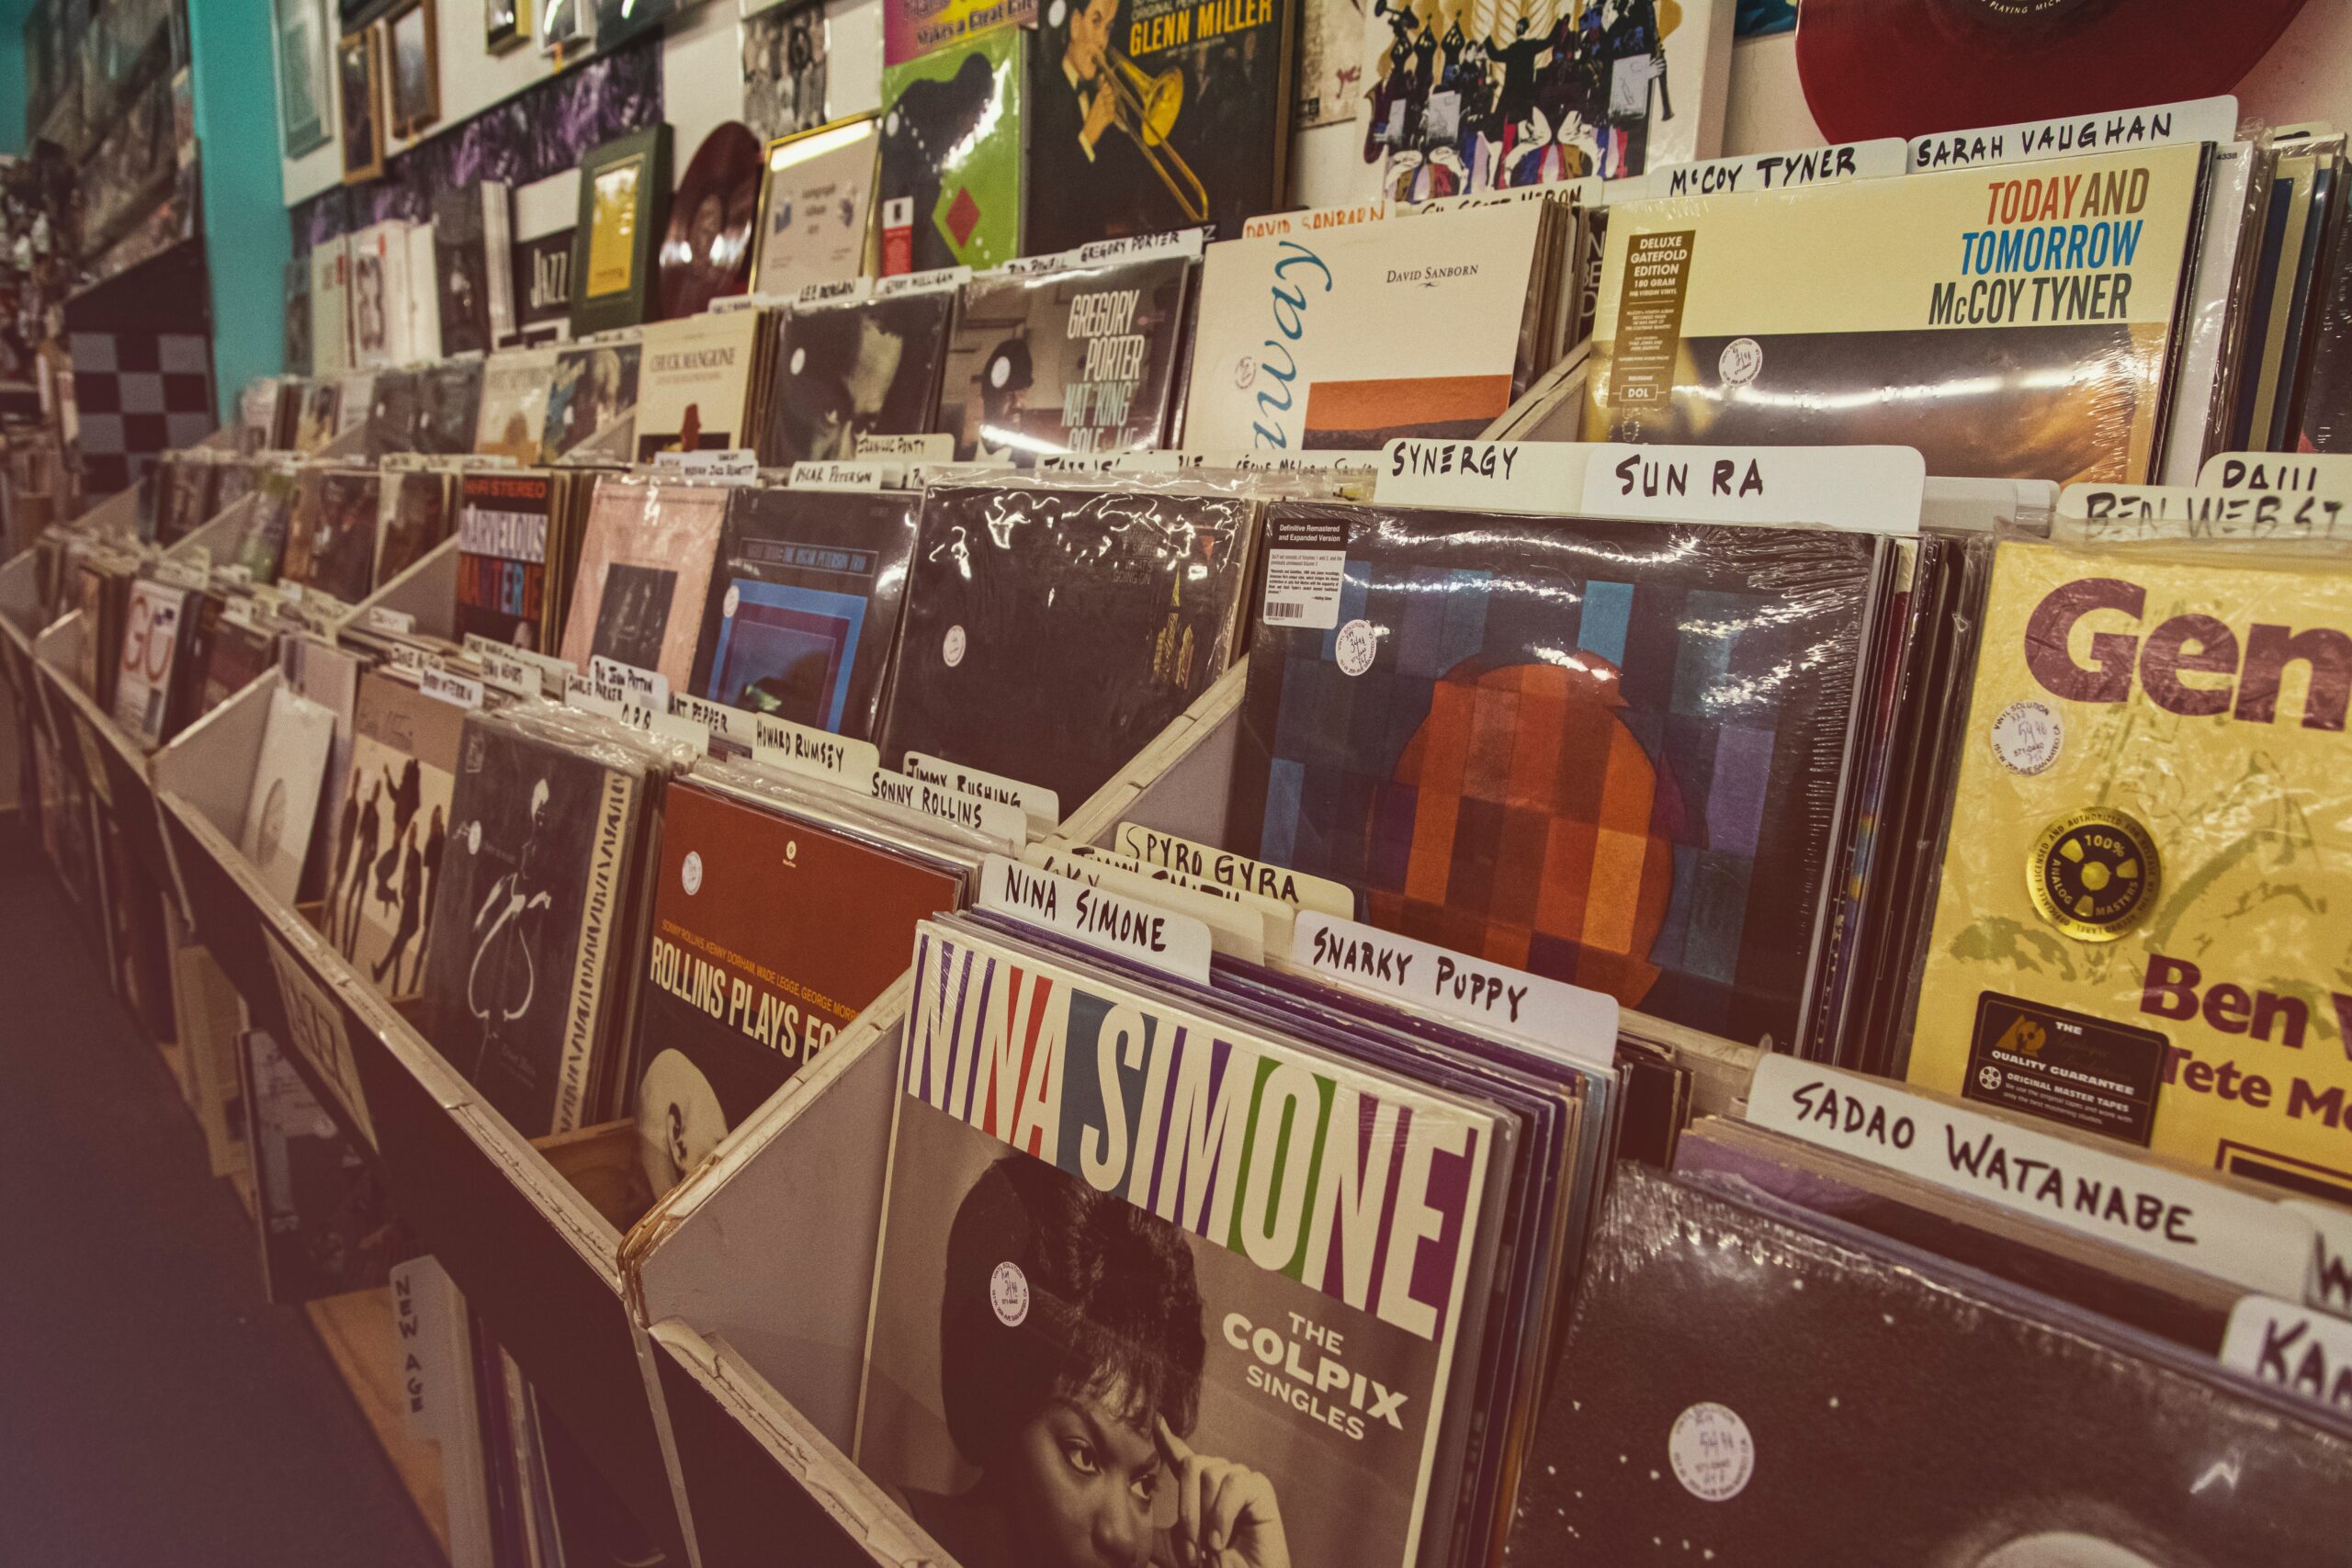 Depicts a record store - various records are organized into boxes and layered onto shelves. Used as a cover image for an overview article about Royalty Exchange.